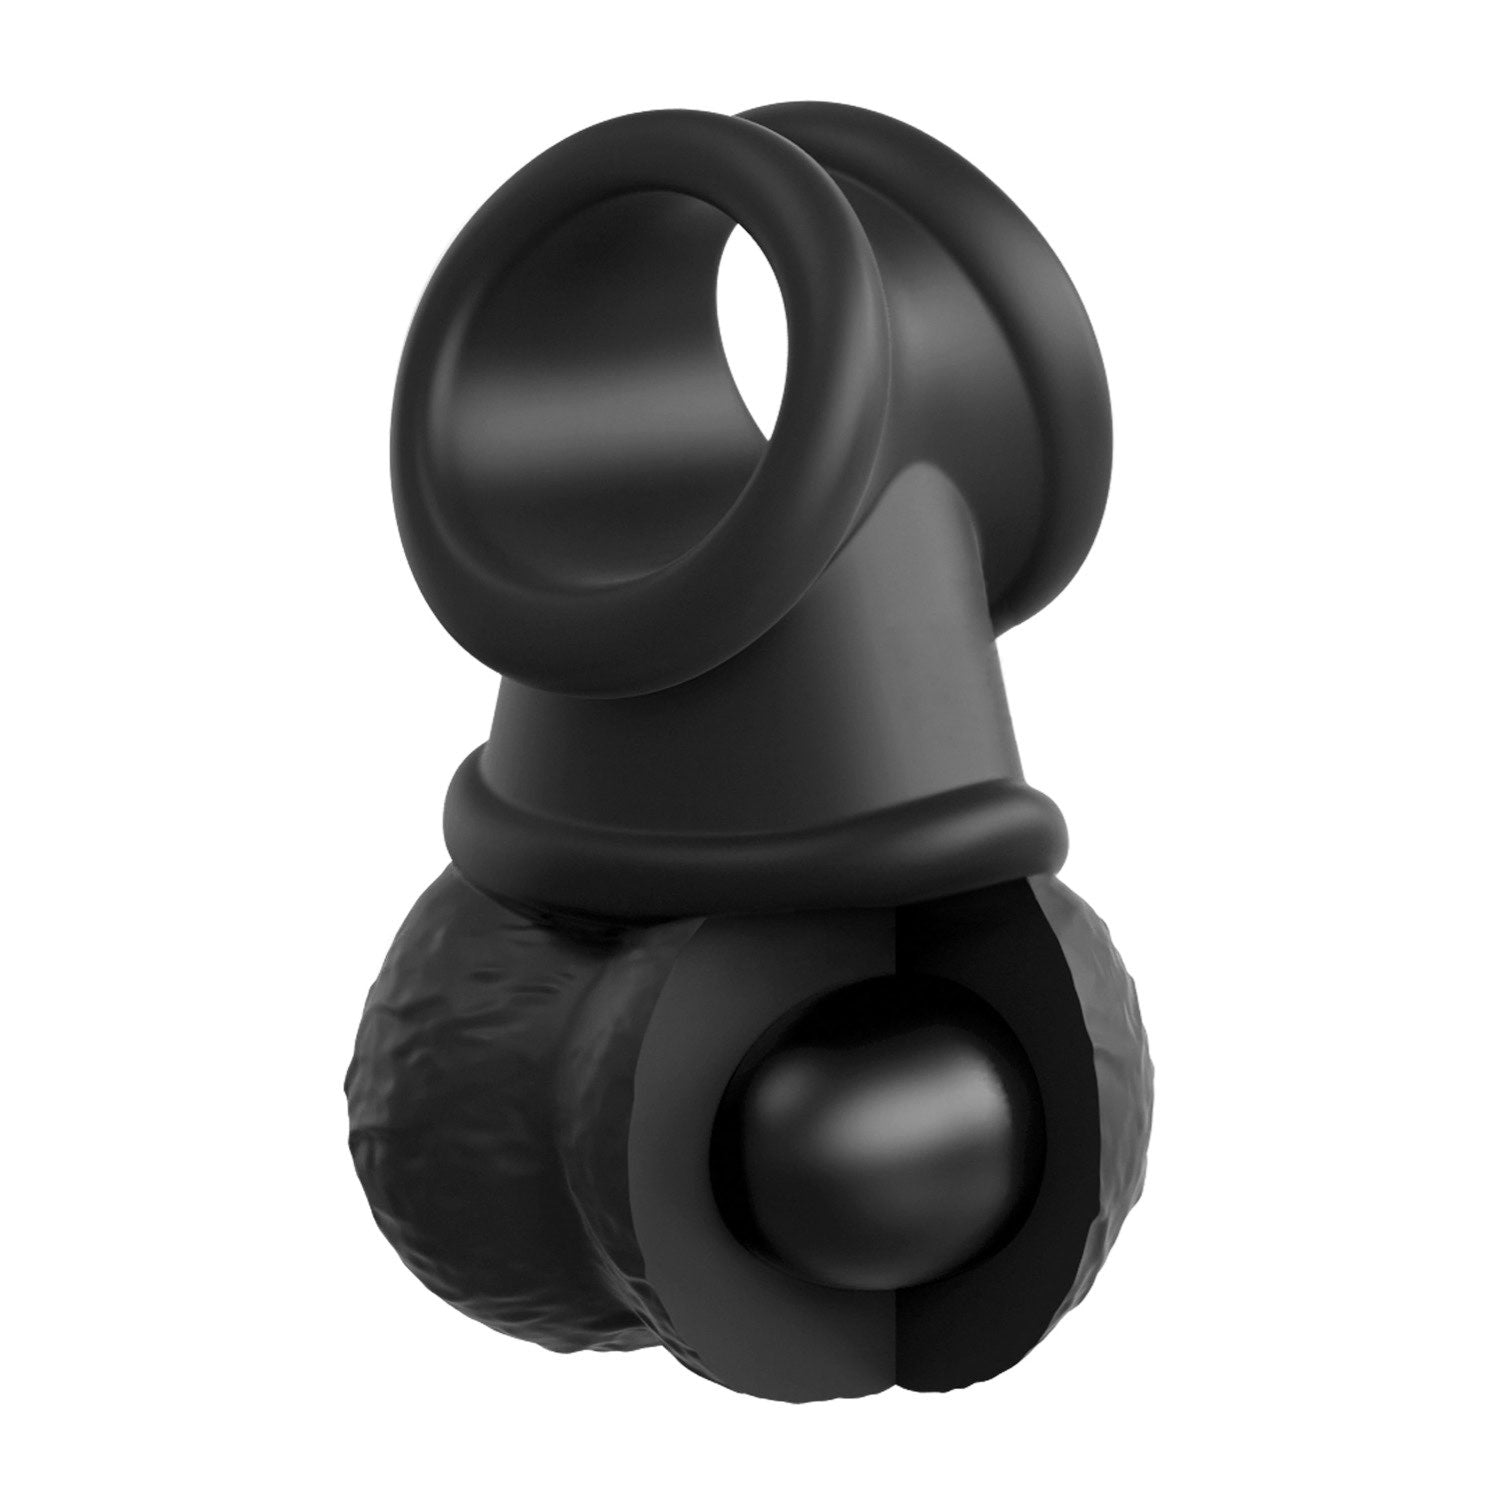 King Cock Elite Deluxe Silicone Body Dock Kit - Body Dock Strap-On Harness with 20.3 cm Dong &amp; Swinging Balls Ring by Pipedream